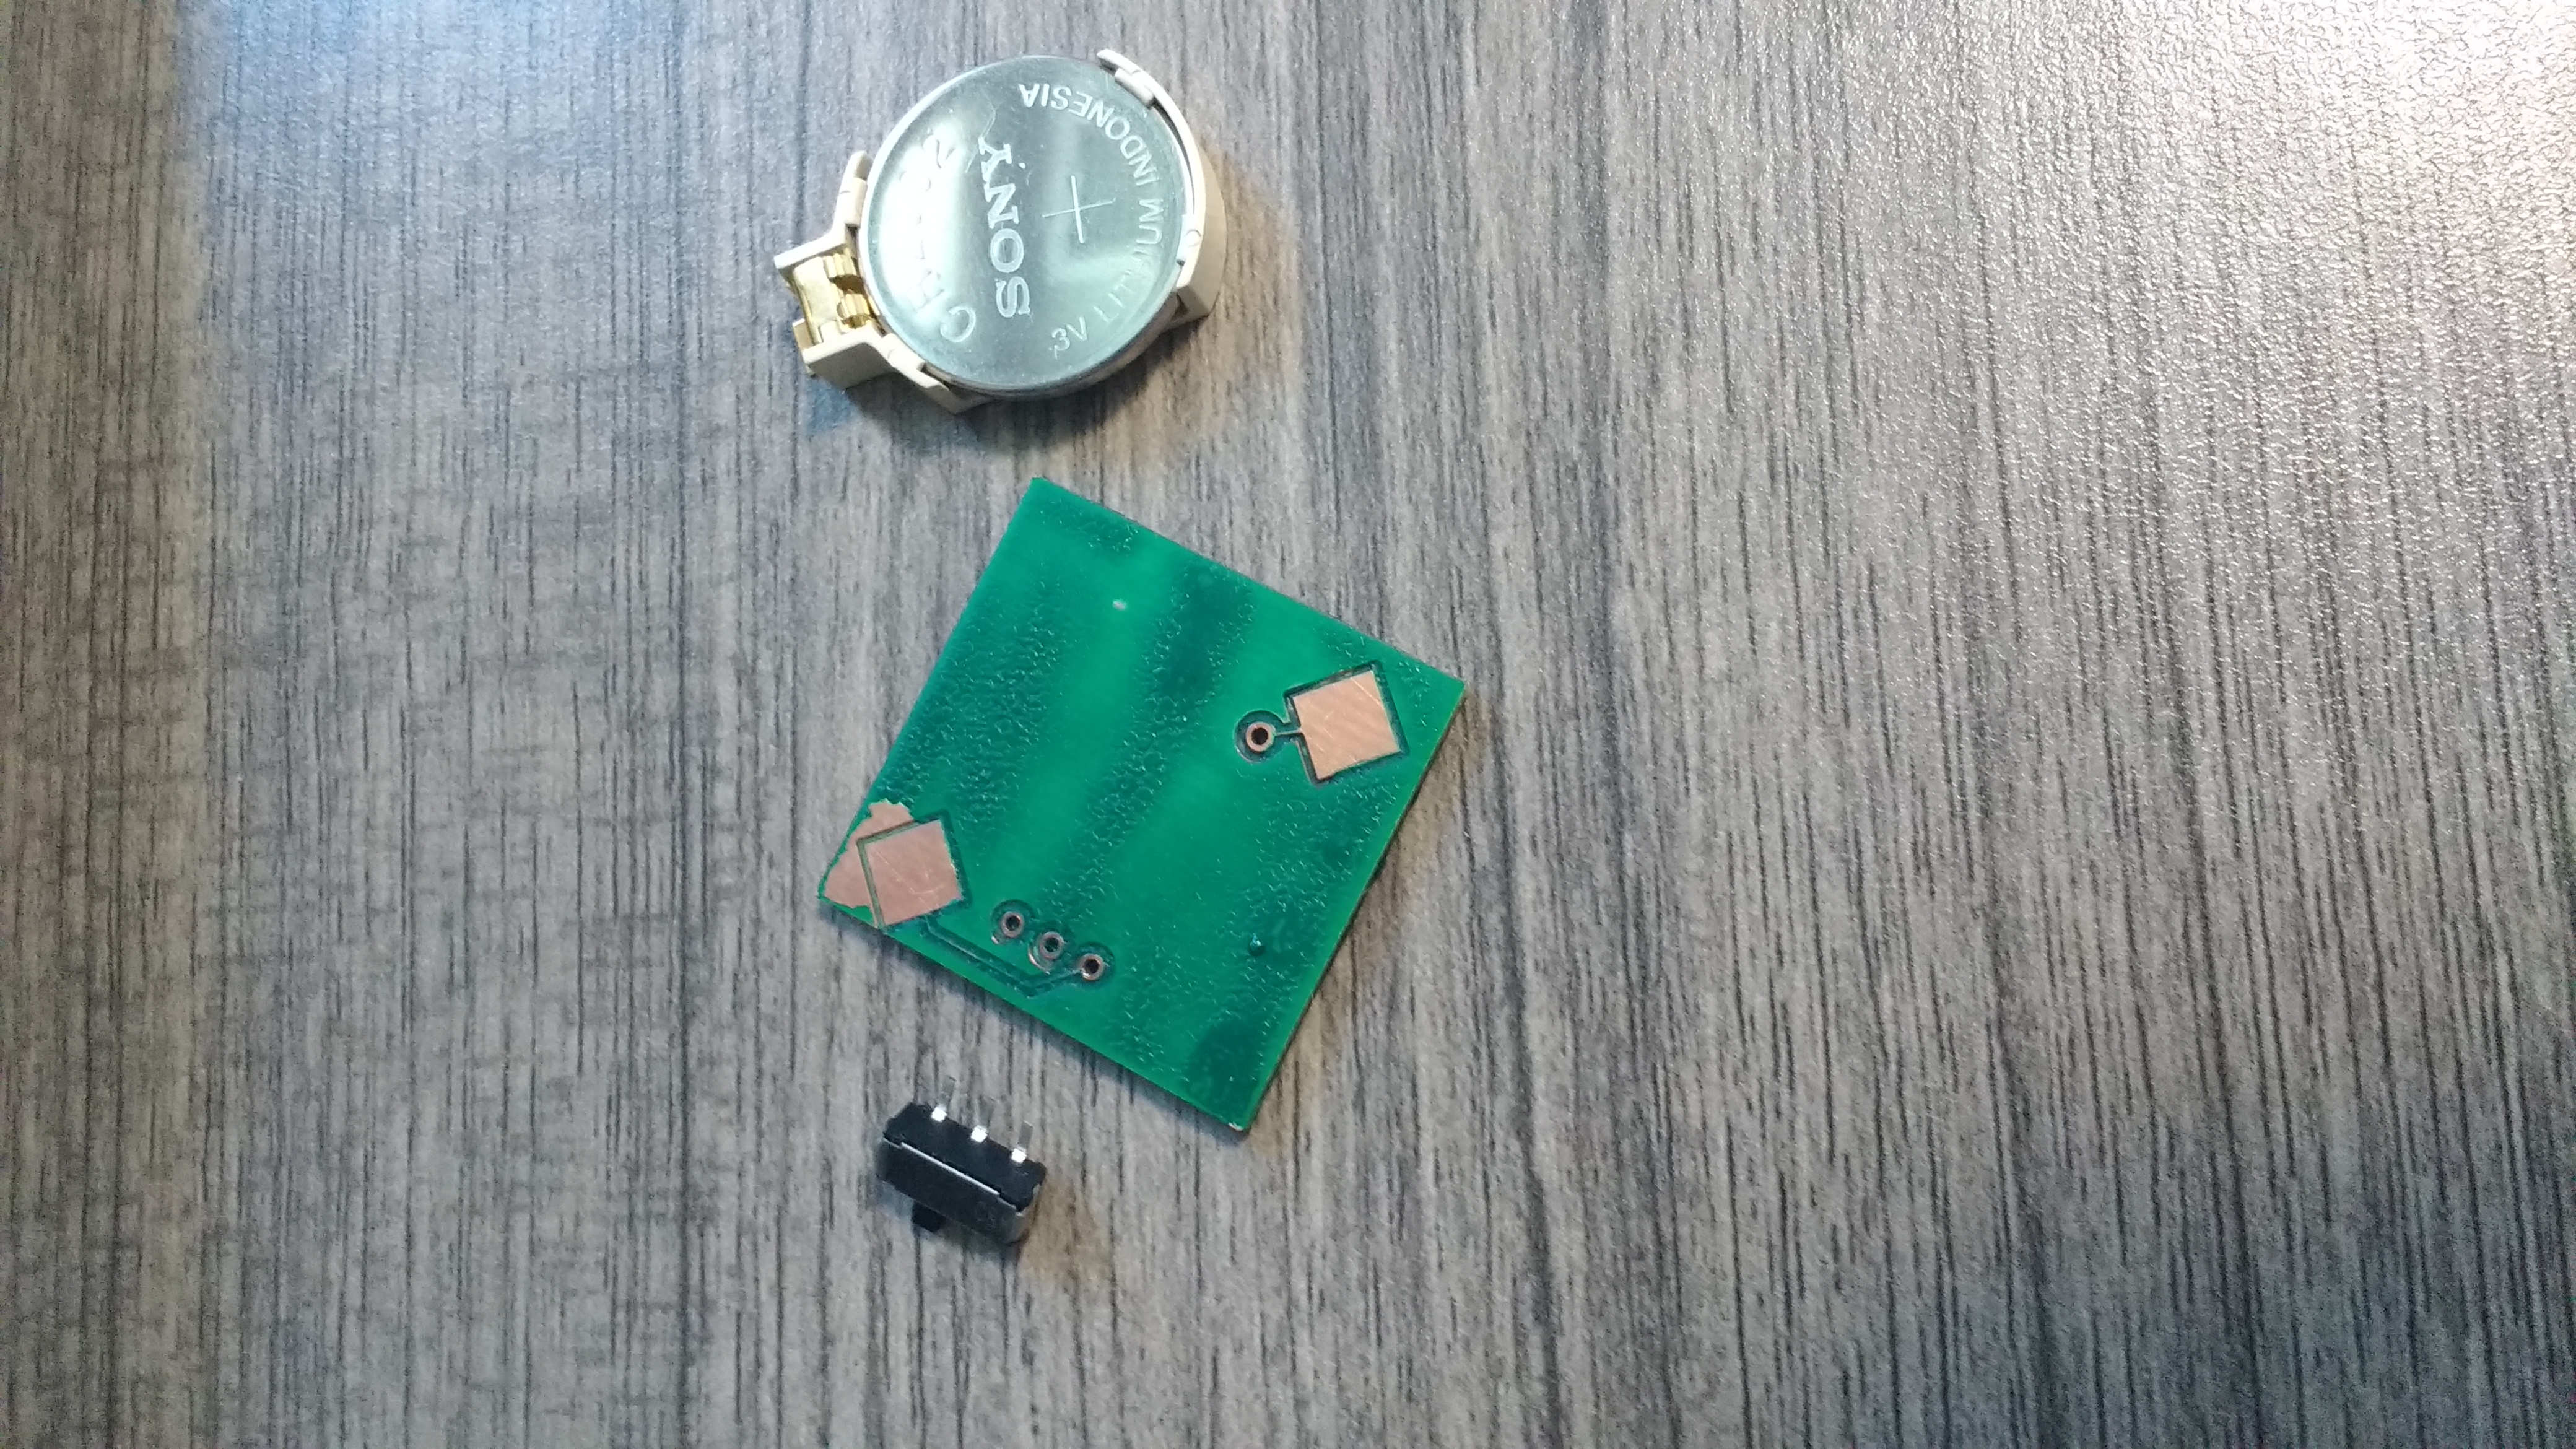 the bottom of a 1 inch by 1 inch copper PCB. It has green insulation on it, with large exposed copper pads for soldering a battery mount.